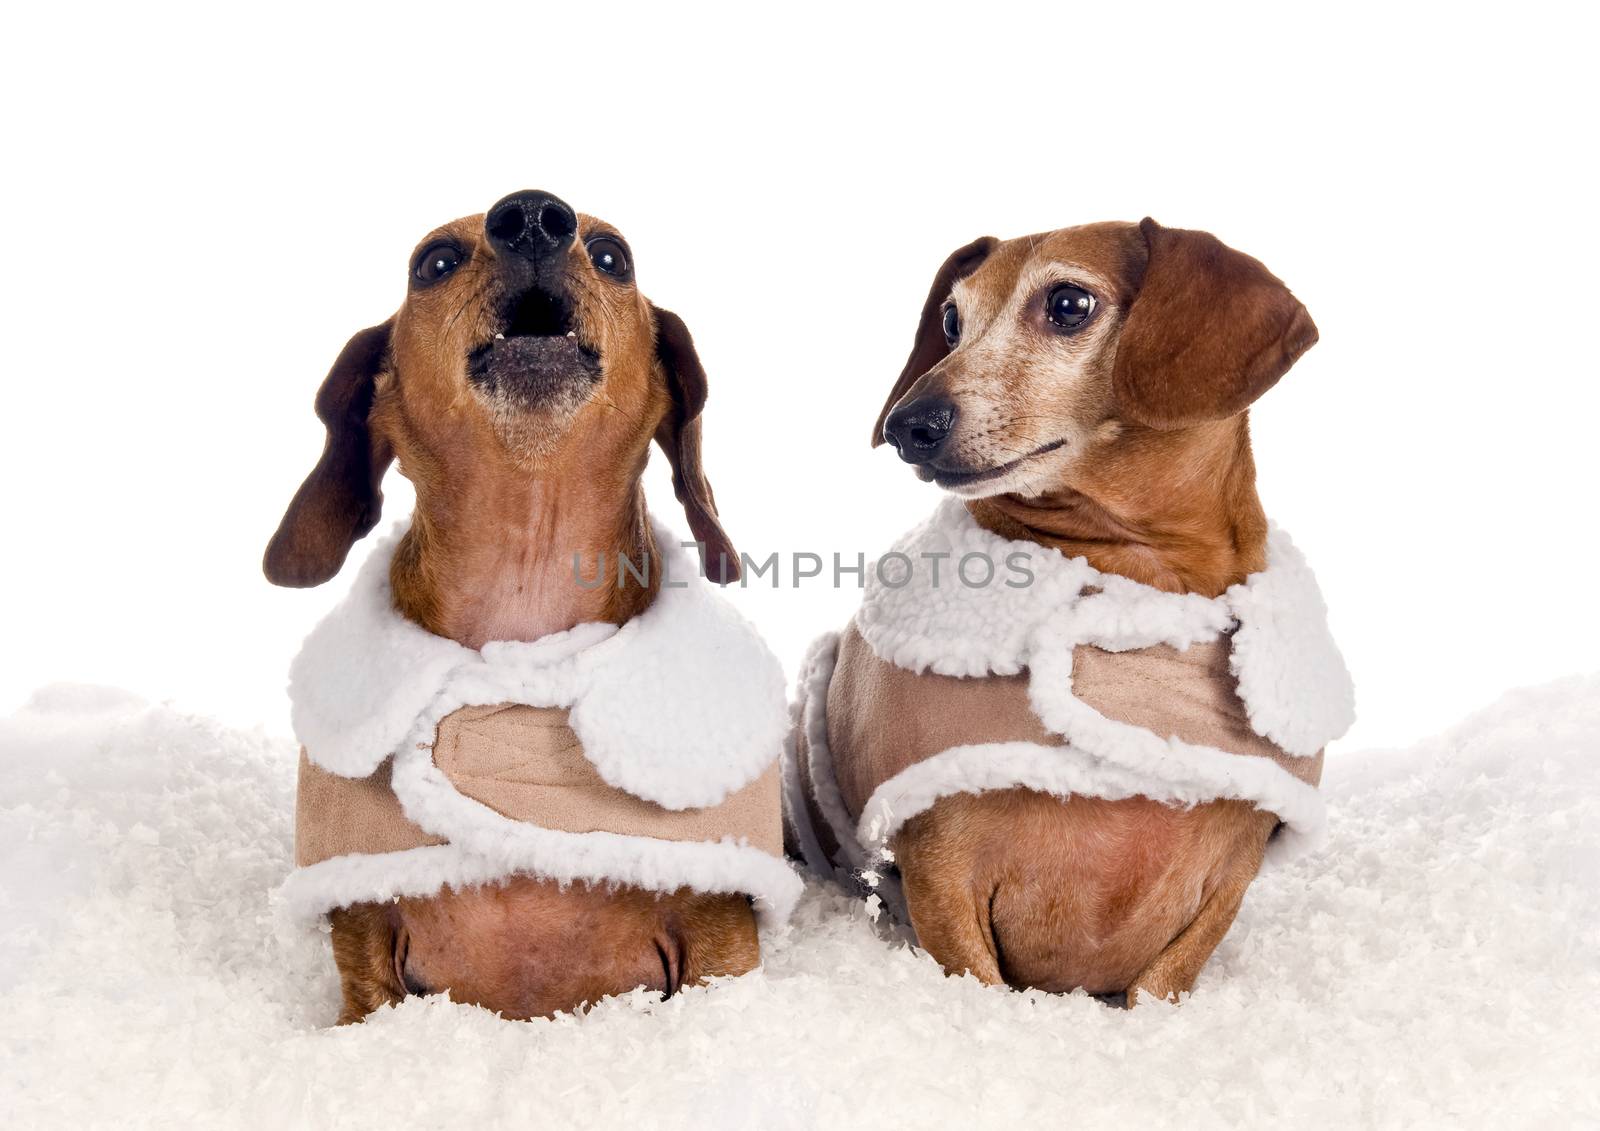 Dachshunds In Faux Snow Calling For HELP by stockbuster1